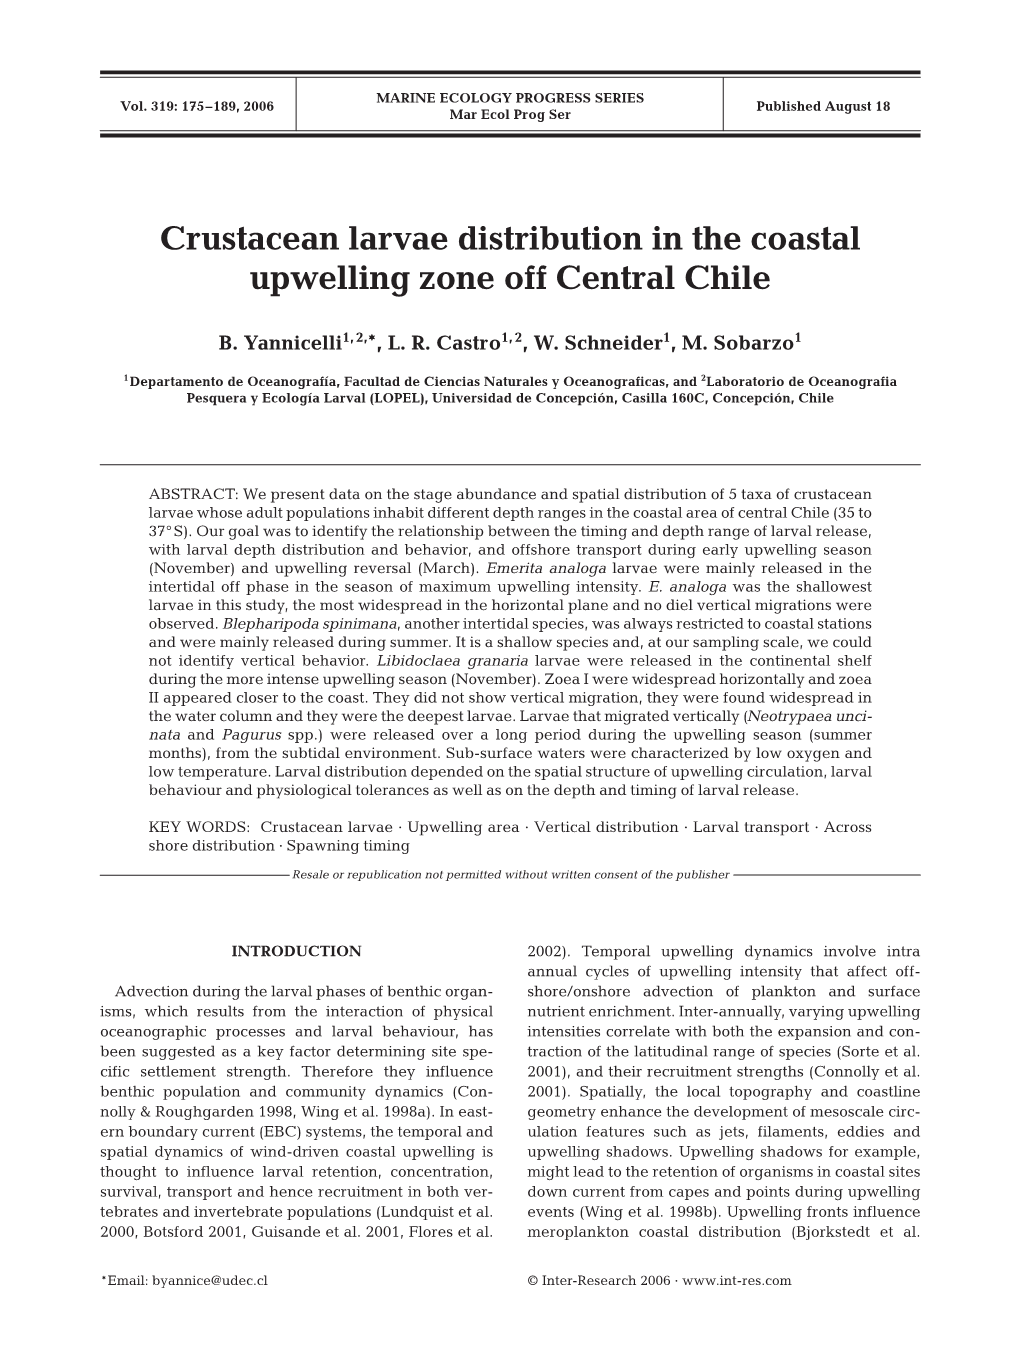 Crustacean Larvae Distribution in the Coastal Upwelling Zone Off Central Chile